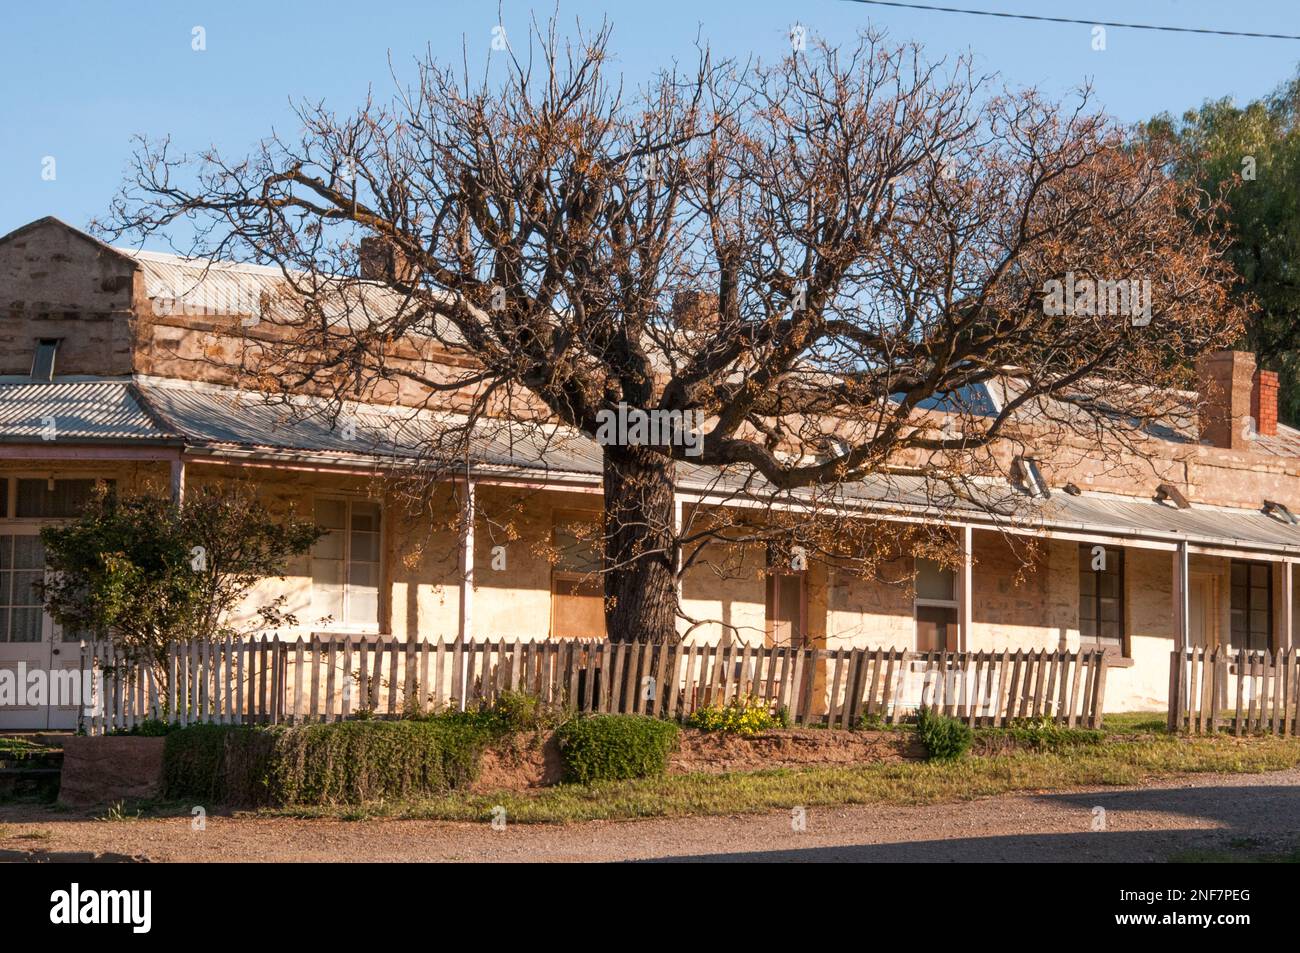 Workers' cottages in the historic copper mining town of Burra, South Australia Stock Photo